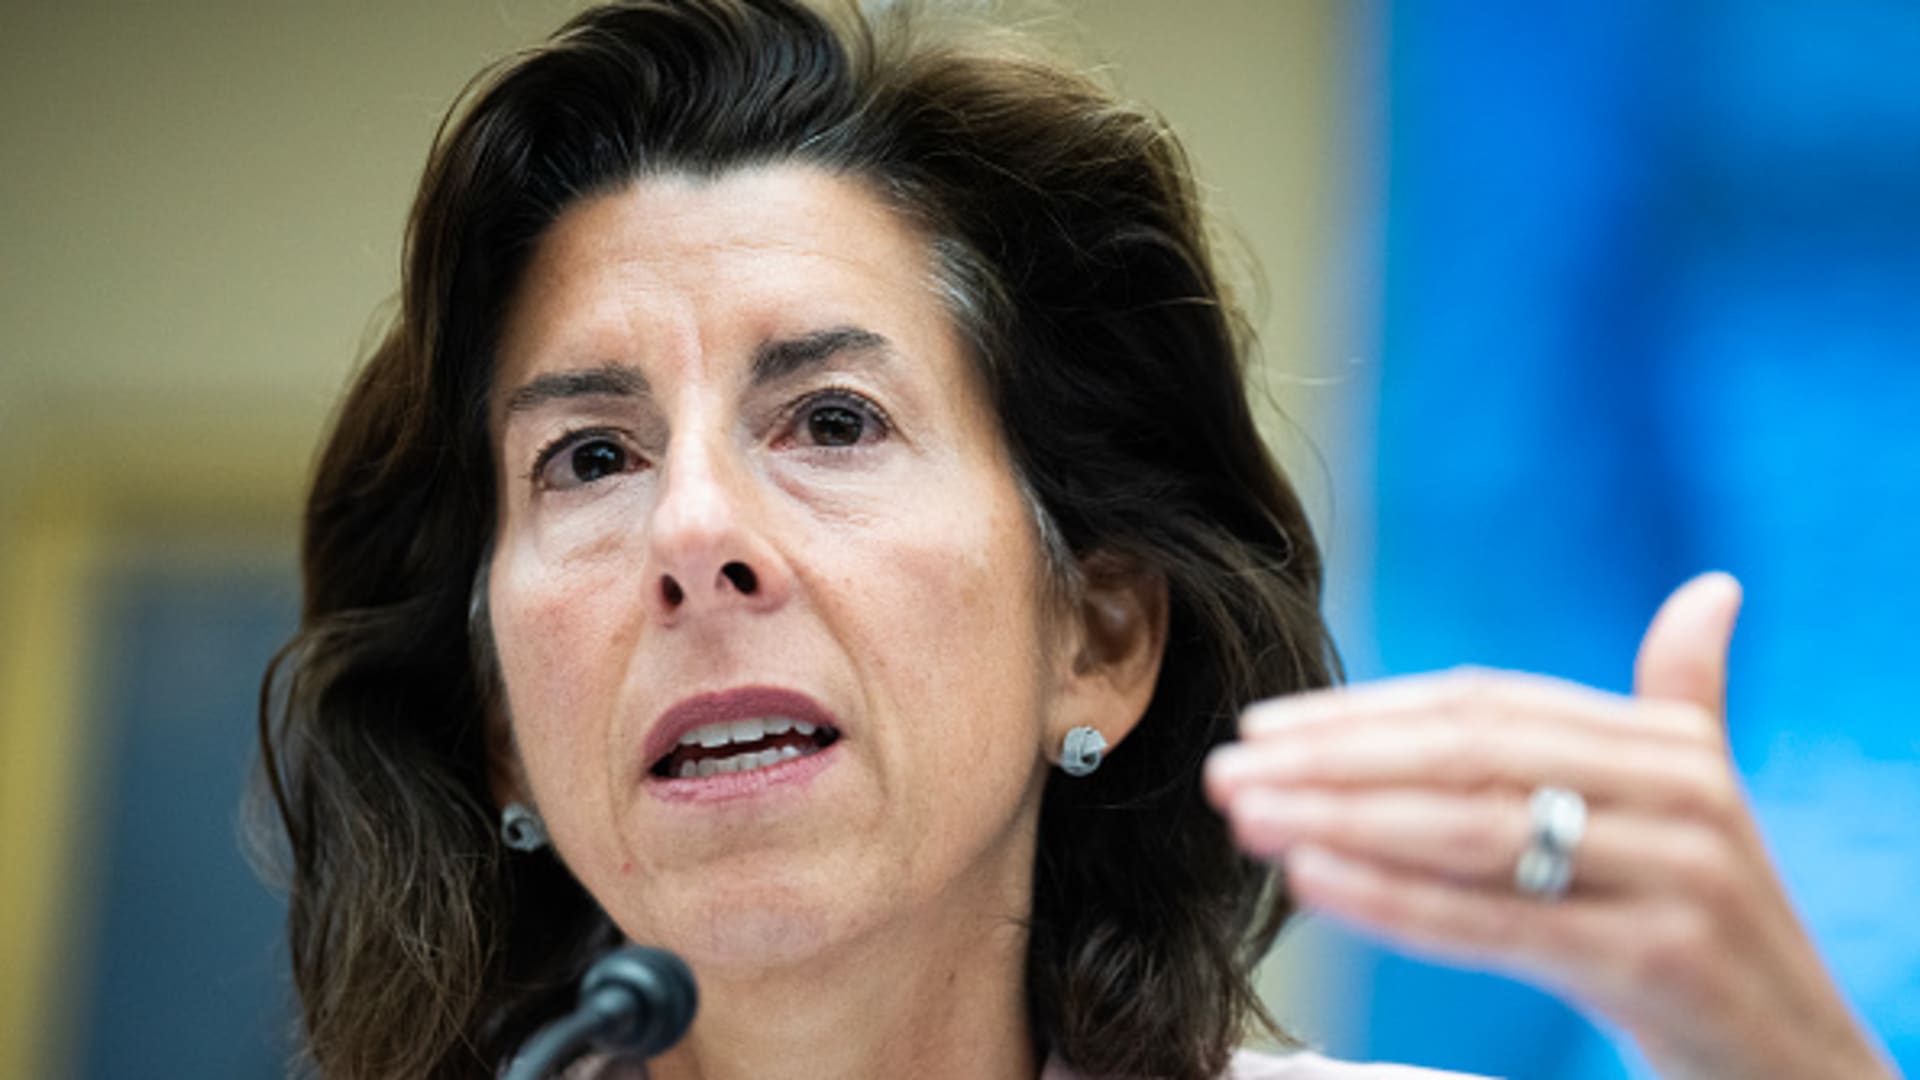 Democrats ask Raimondo for more oversight on CHIPS funding [Video]